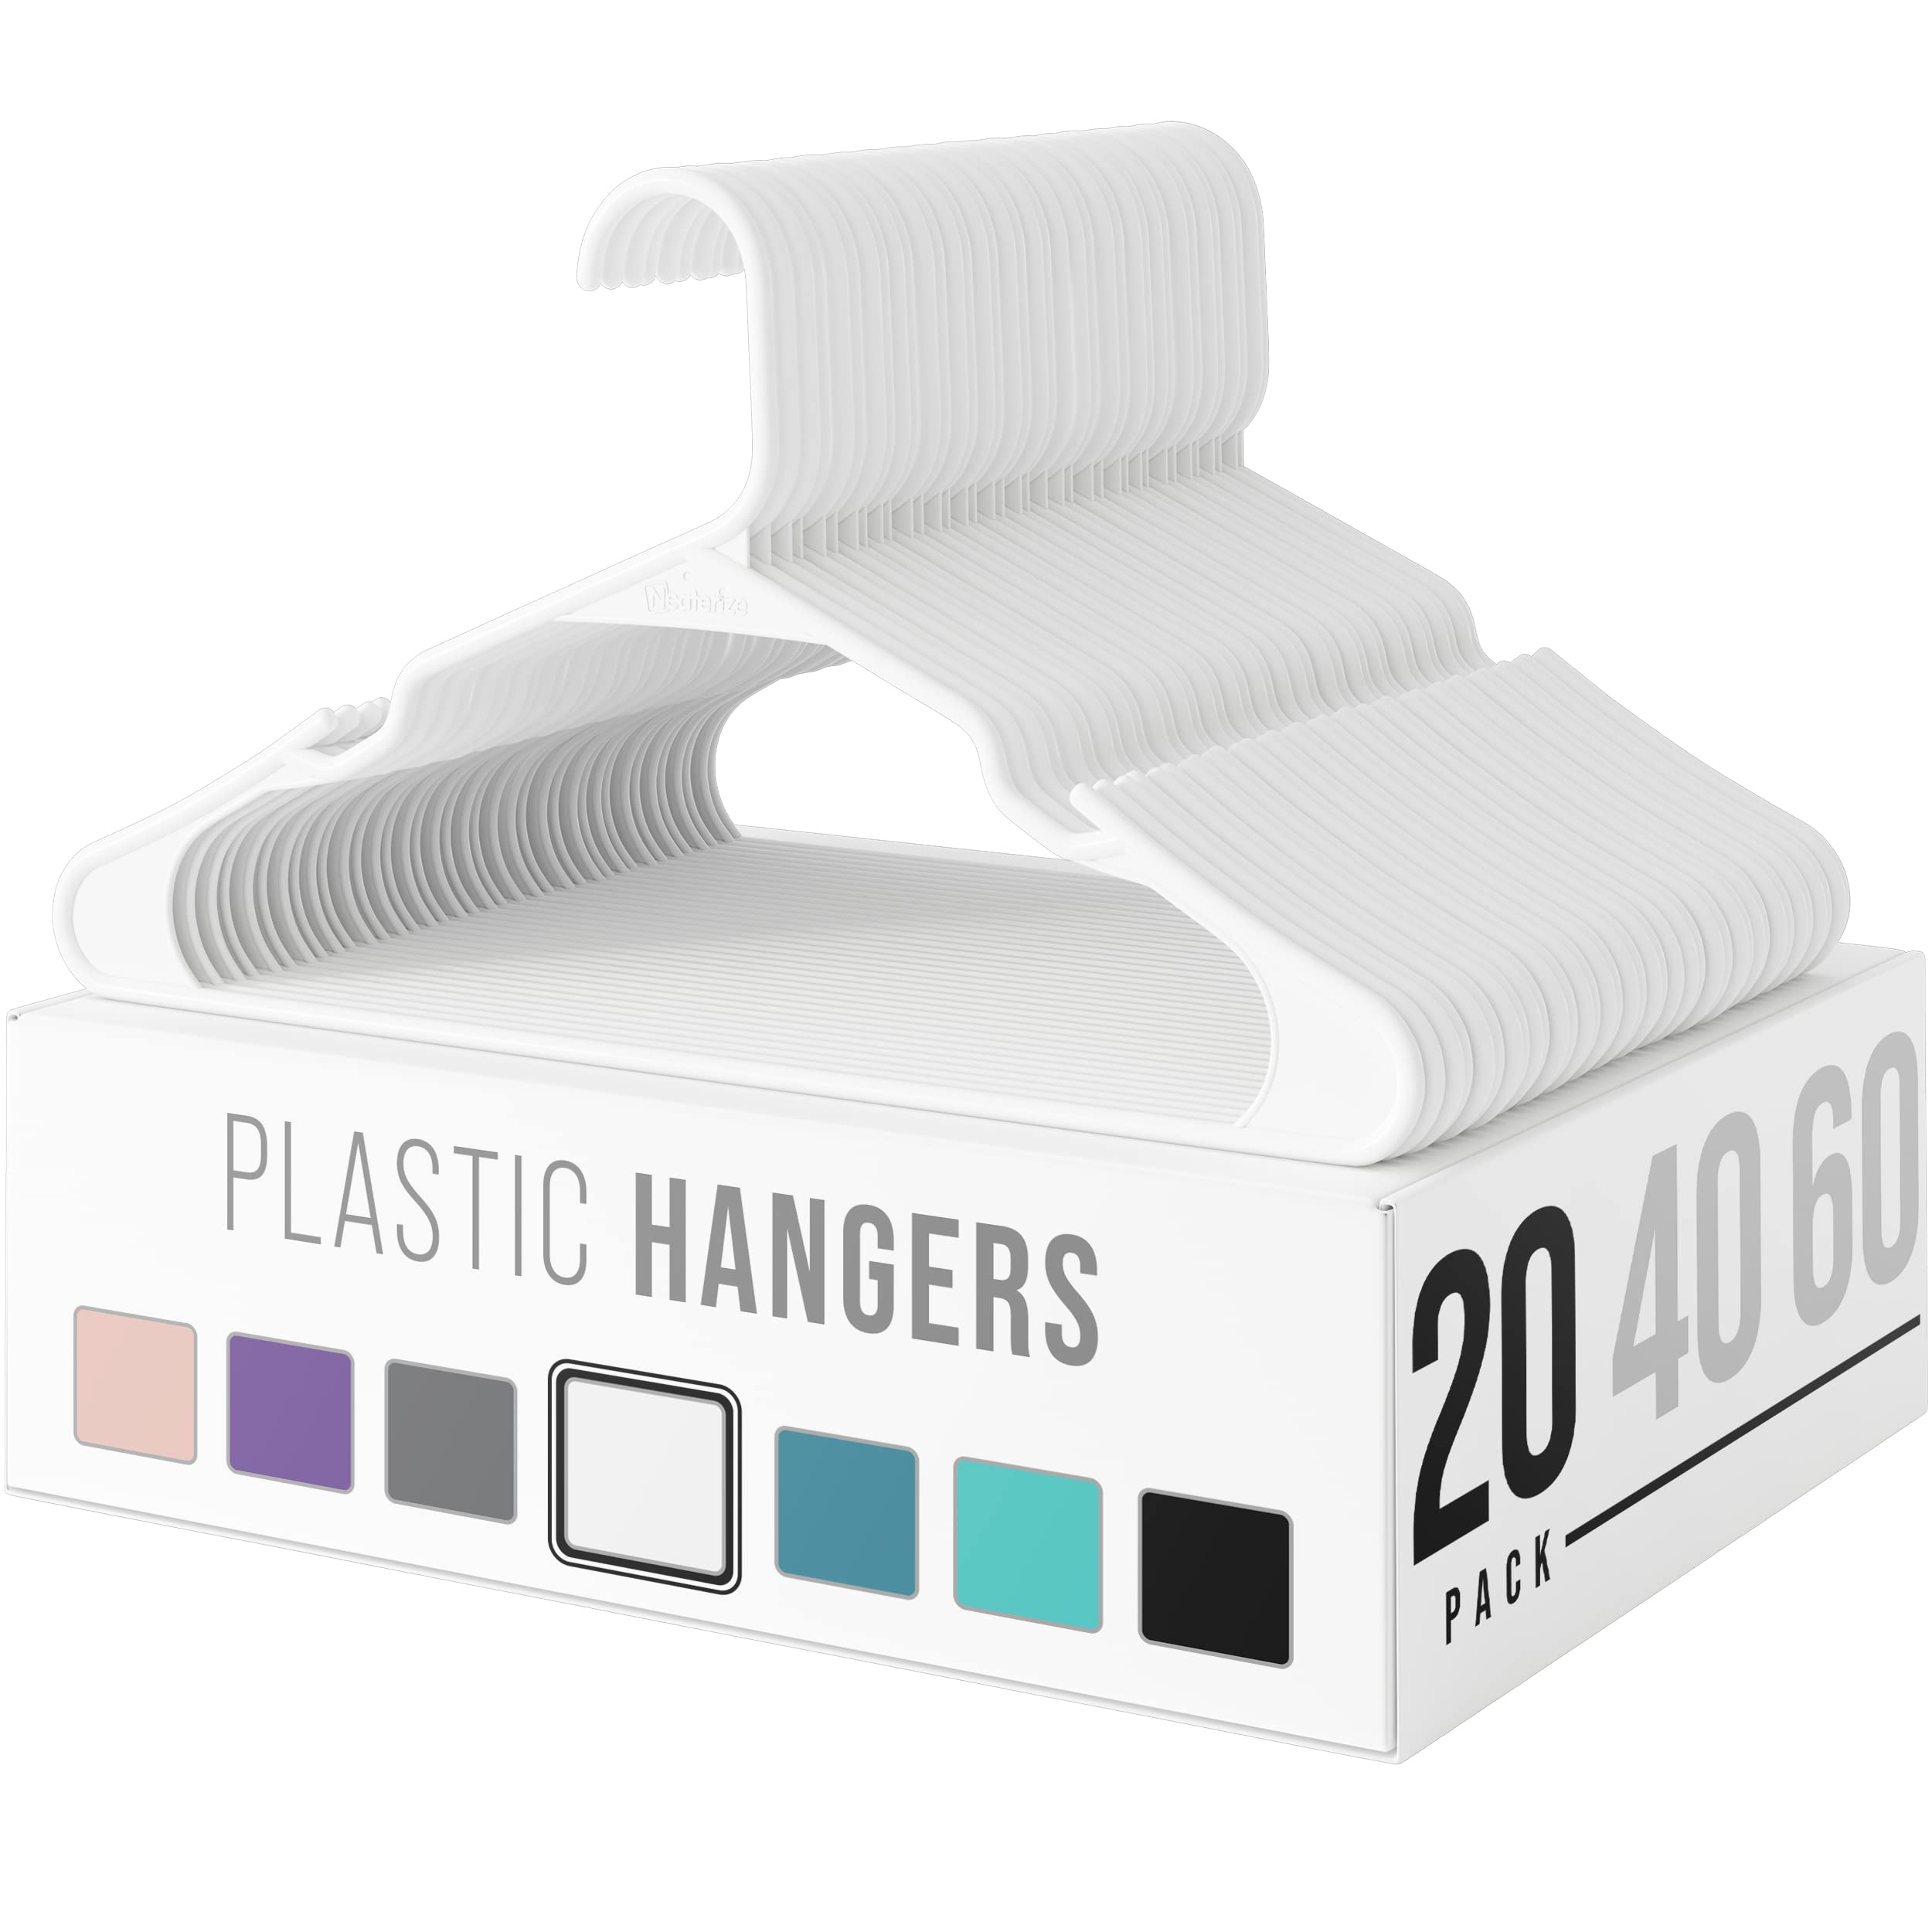 Plastic Clothes Hangers | Heavy Duty Durable Coat and Clothes Hangers | Vibrant Color Hangers | Lightweight Space Saving Laundry Hangers | 20, 40, 60 Available (20 Pack - White)  - Like New